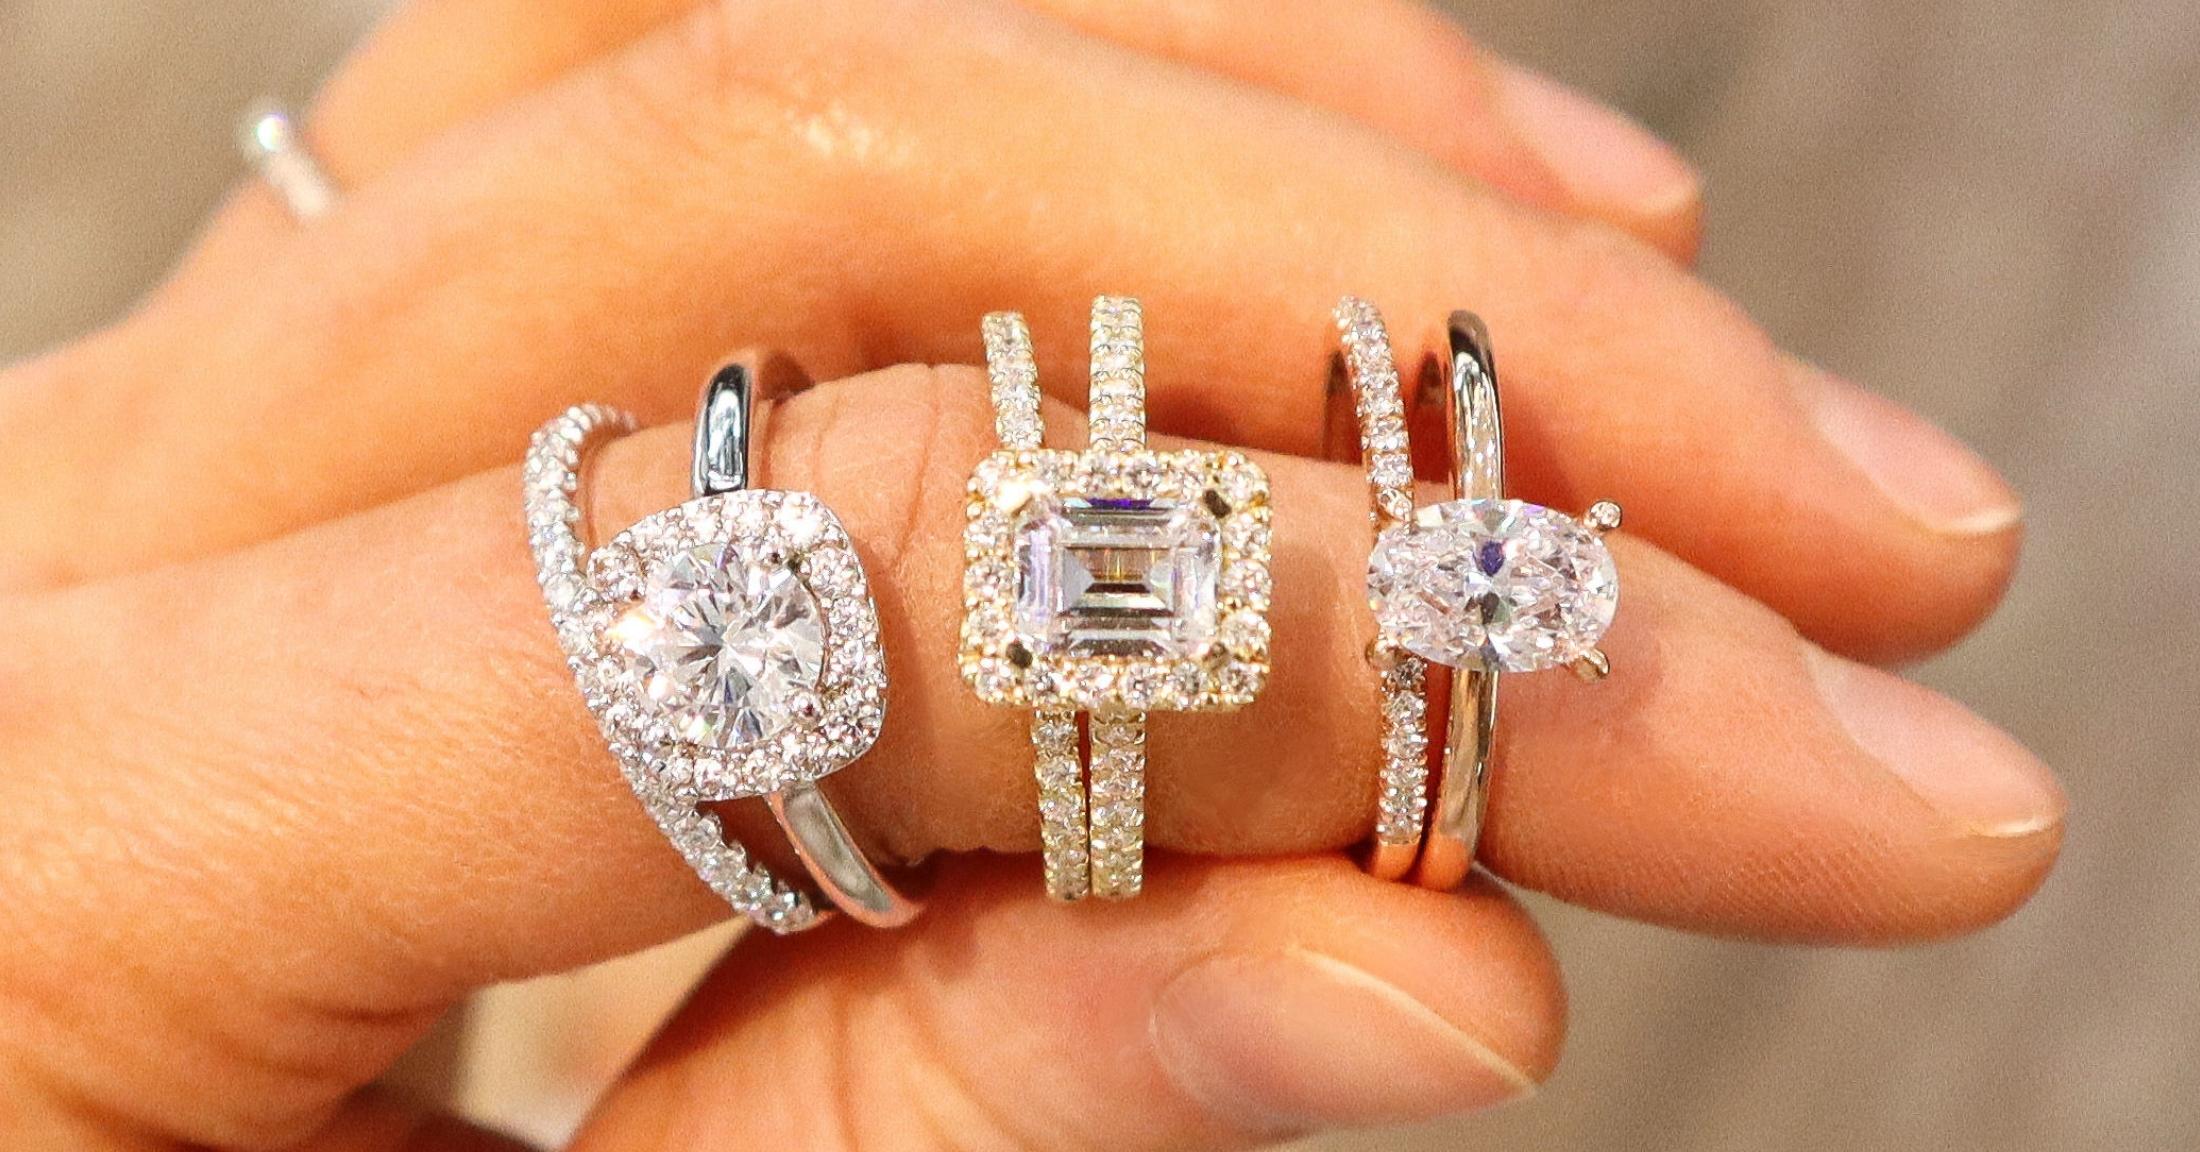 Engagement Ring 101 - Choosing the Right Metal